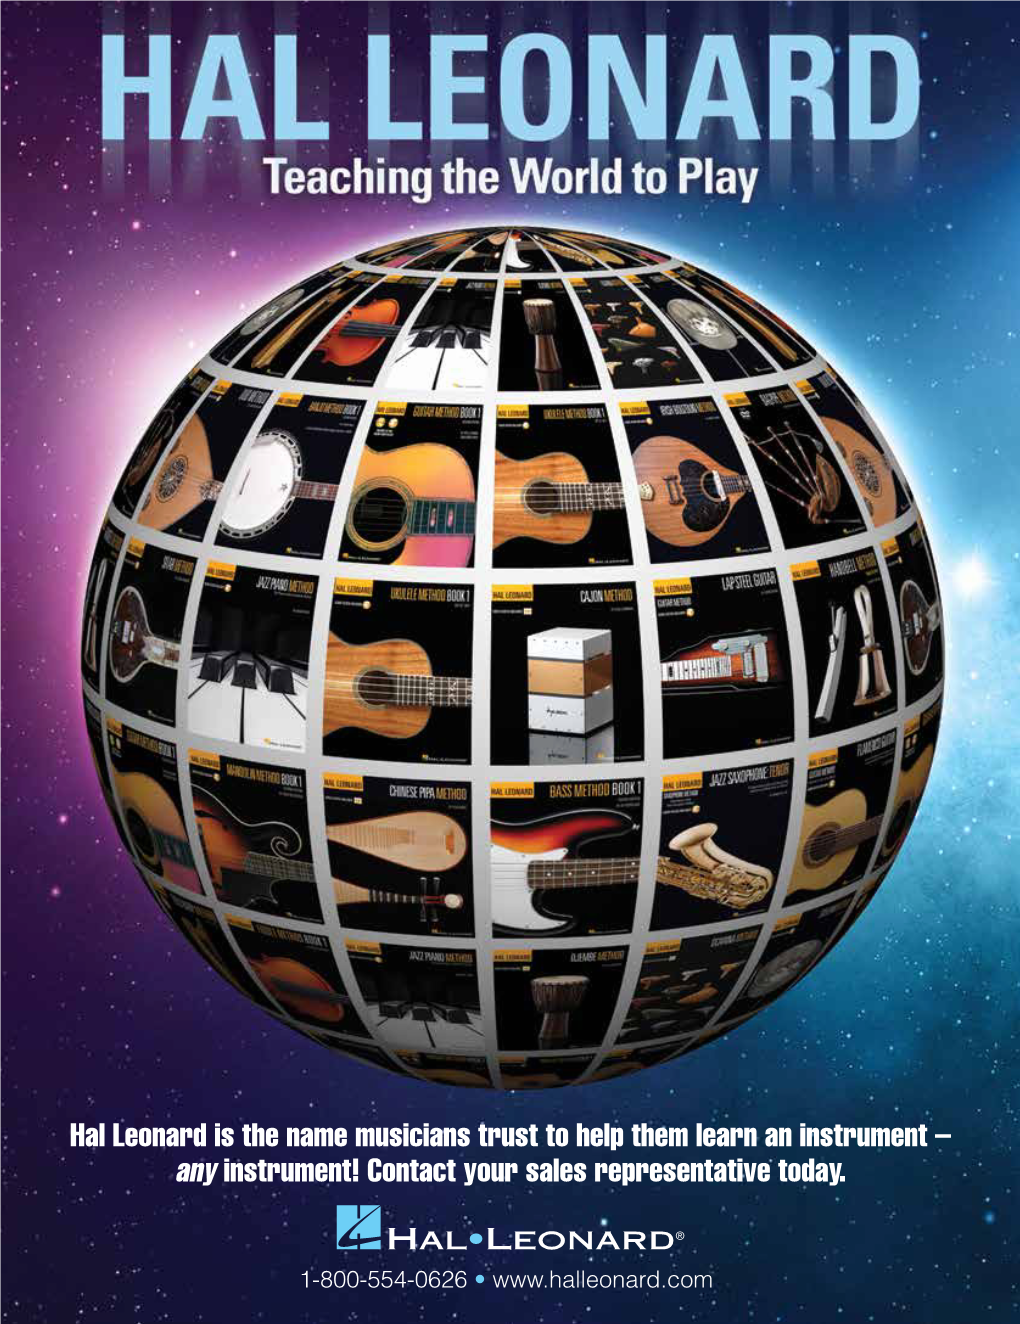 Hal Leonard Is the Name Musicians Trust to Help Them Learn an Instrument – Any Instrument! Contact Your Sales Representative Today